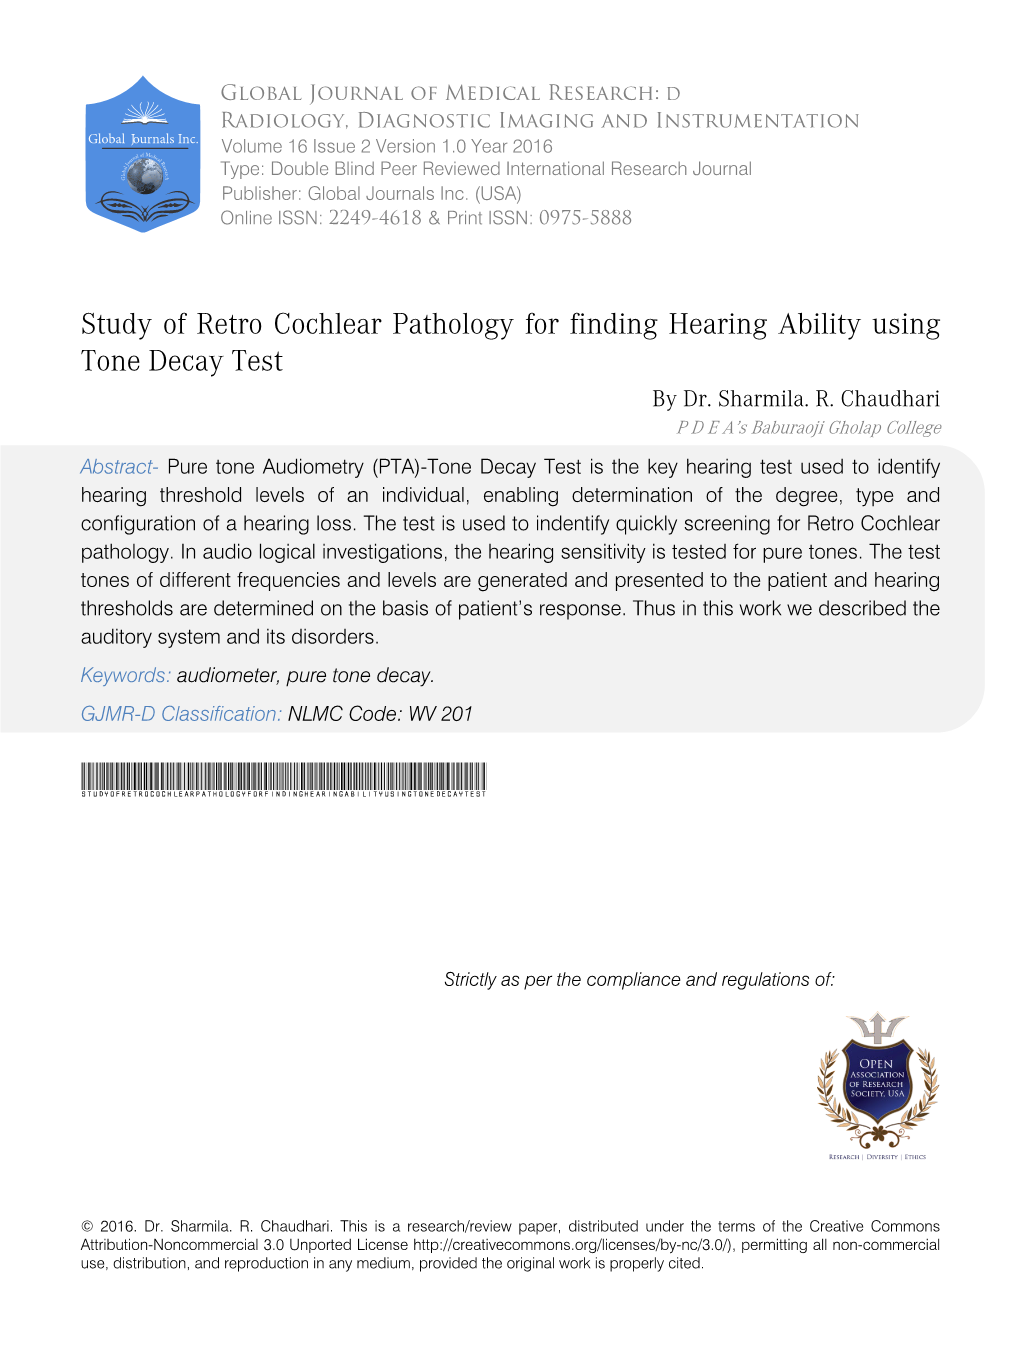 Study of Retro Cochlear Pathology for Finding Hearing Ability Using Tone Decay Test by Dr